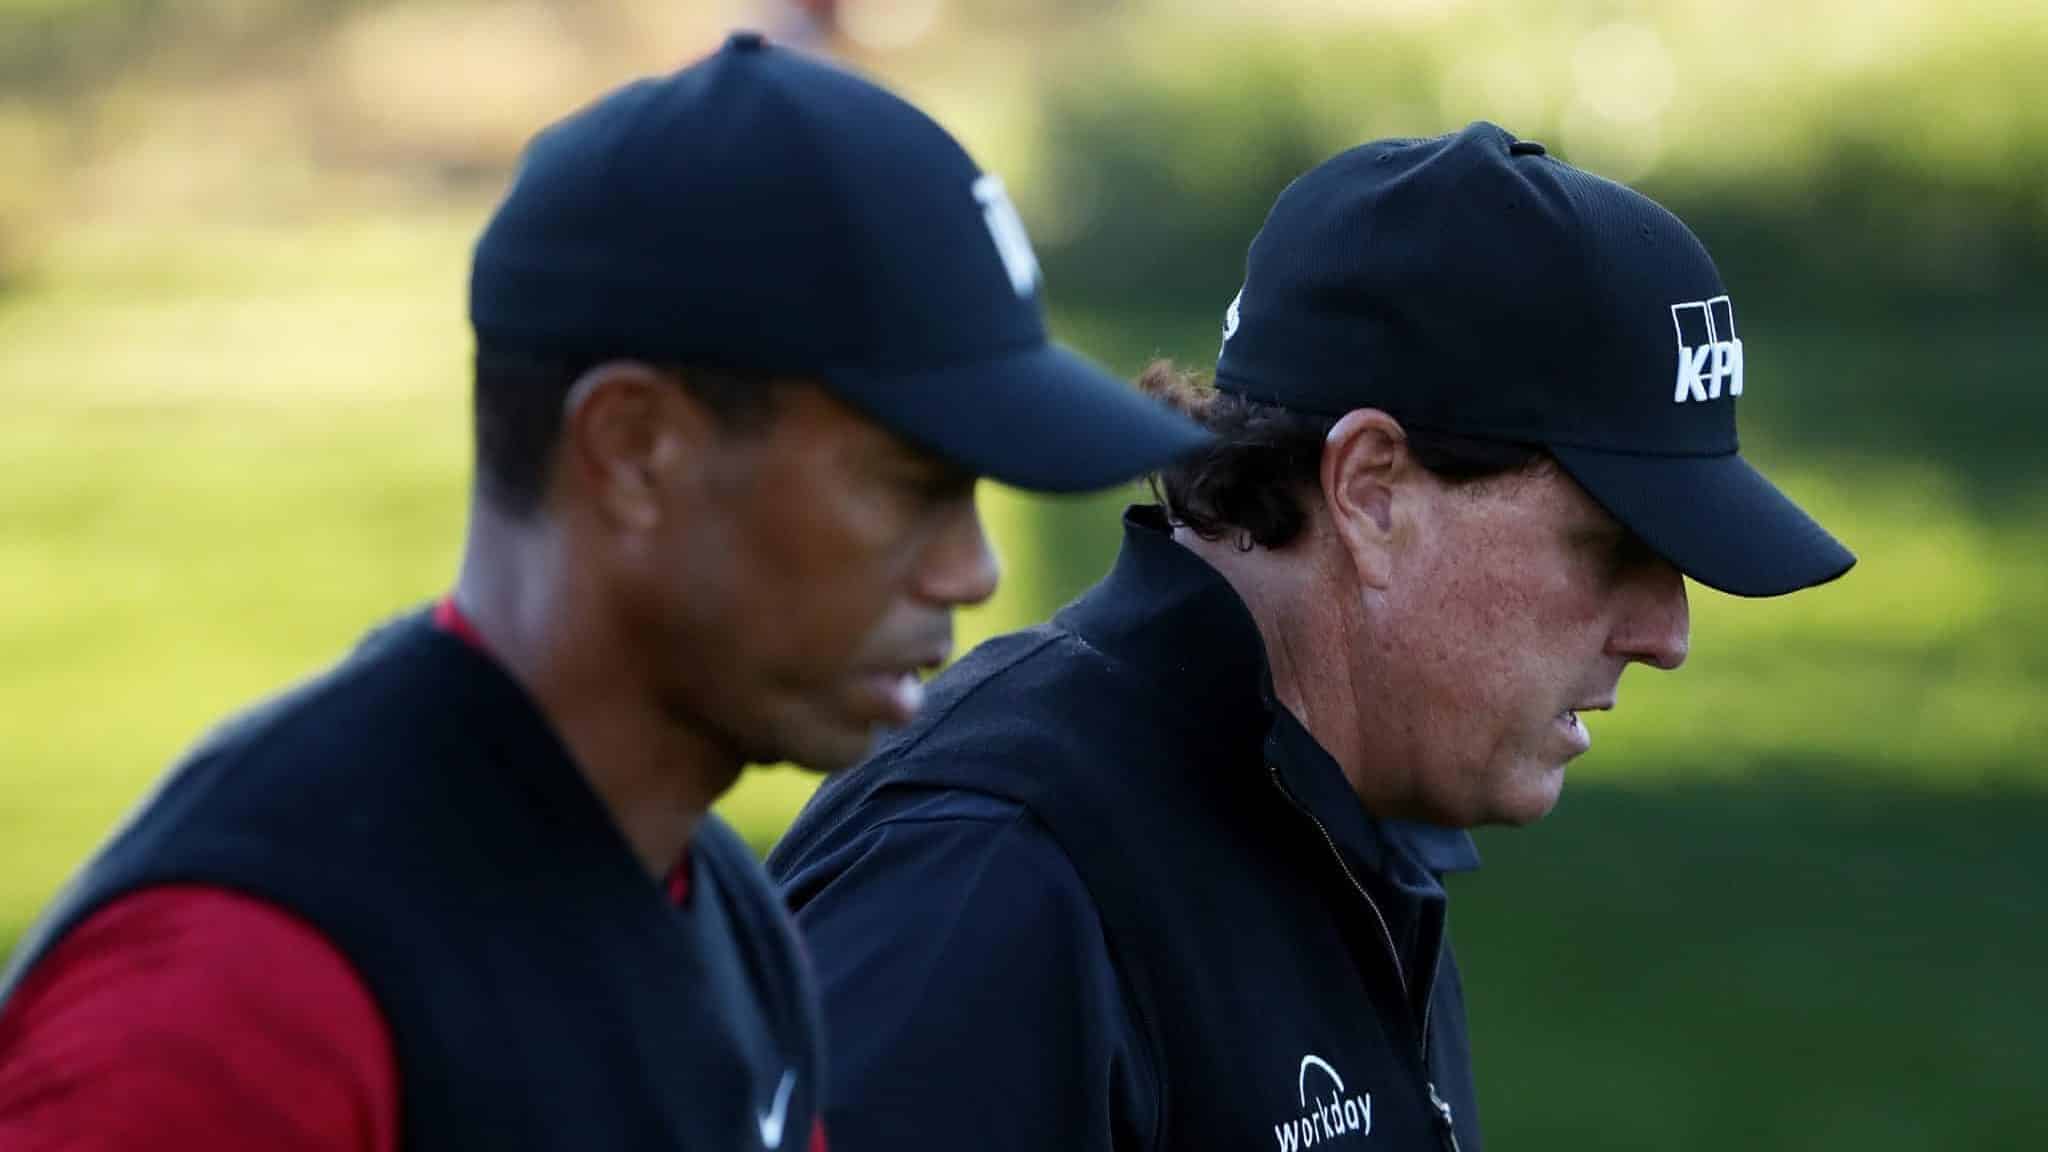 LAS VEGAS, NV - NOVEMBER 23: Tiger Woods and Phil Mickelson walk during The Match: Tiger vs Phil at Shadow Creek Golf Course on November 23, 2018 in Las Vegas, Nevada.